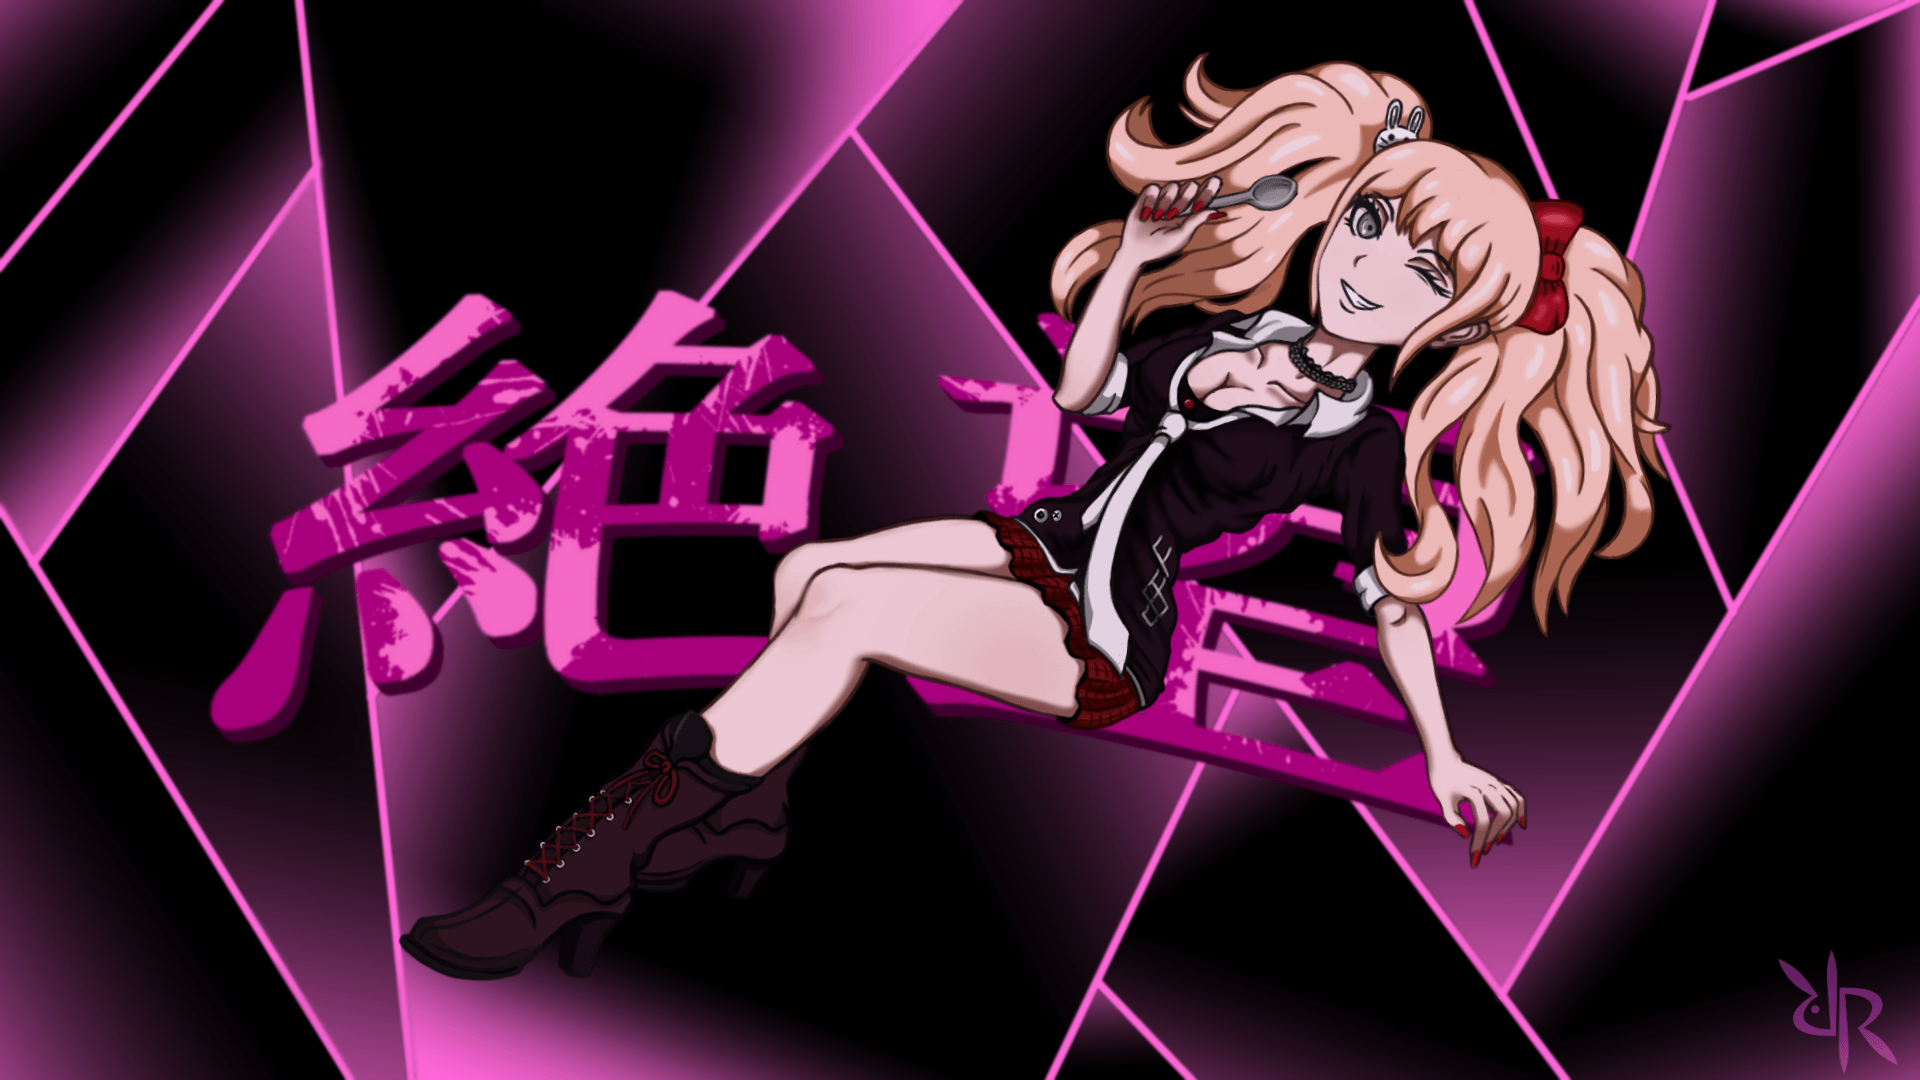 Made a Junko wallpaper for myself